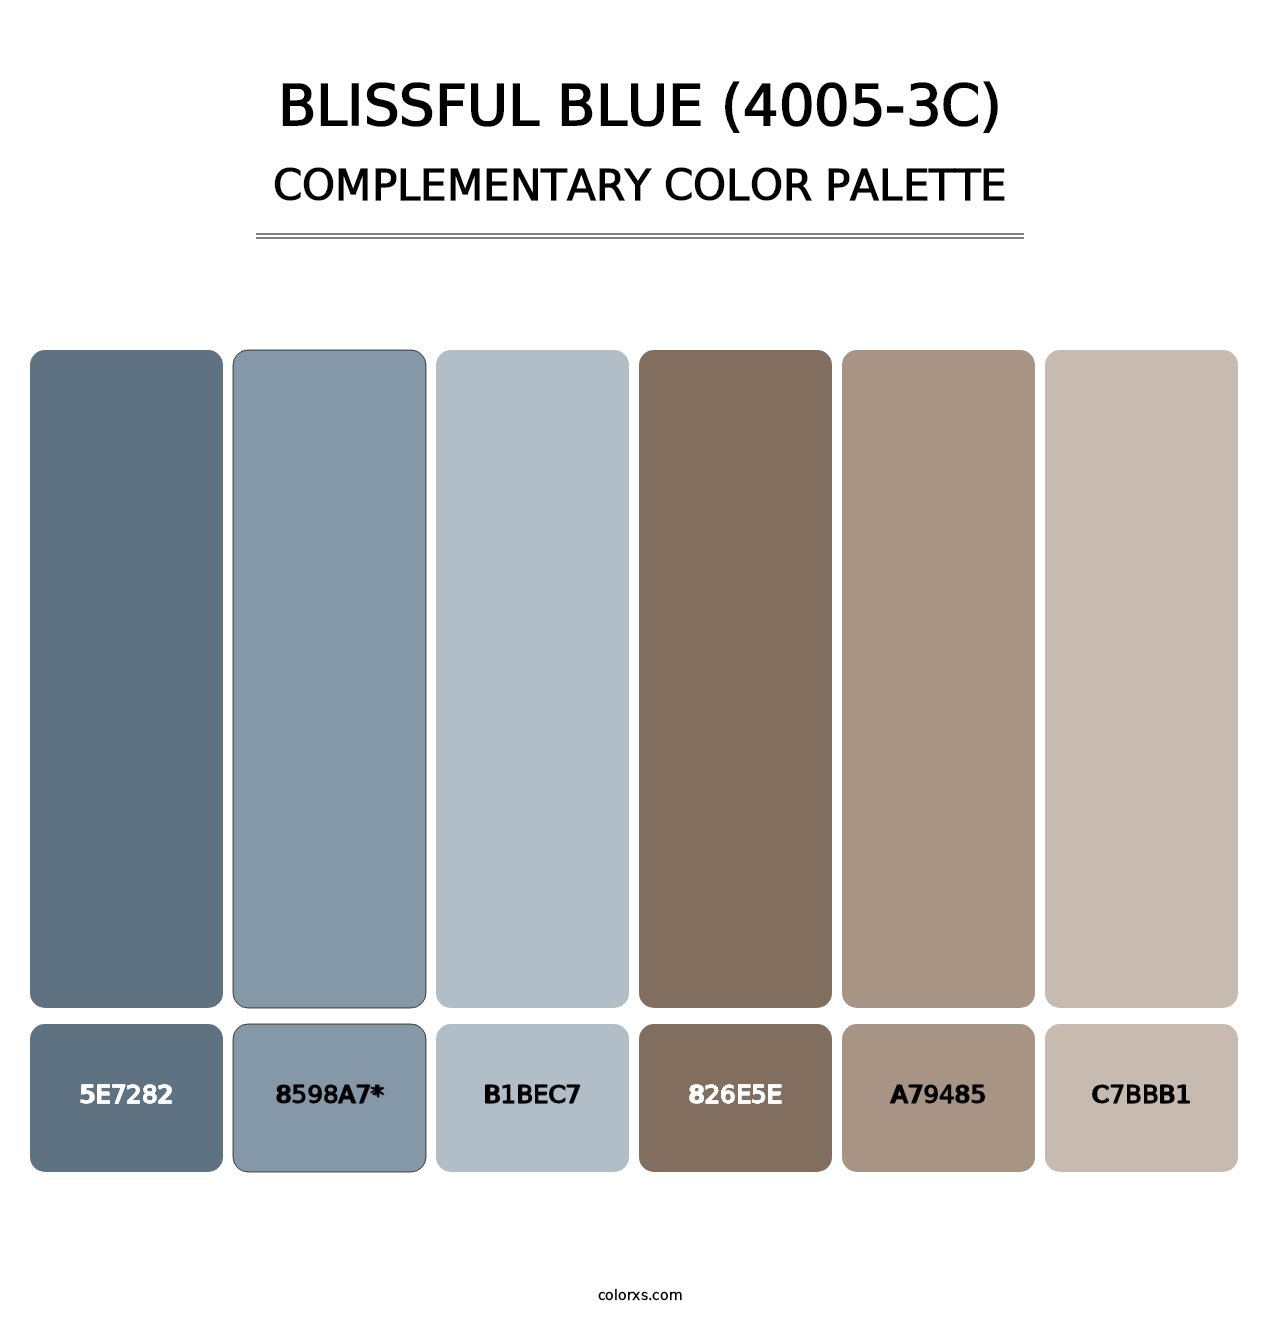 Blissful Blue (4005-3C) - Complementary Color Palette